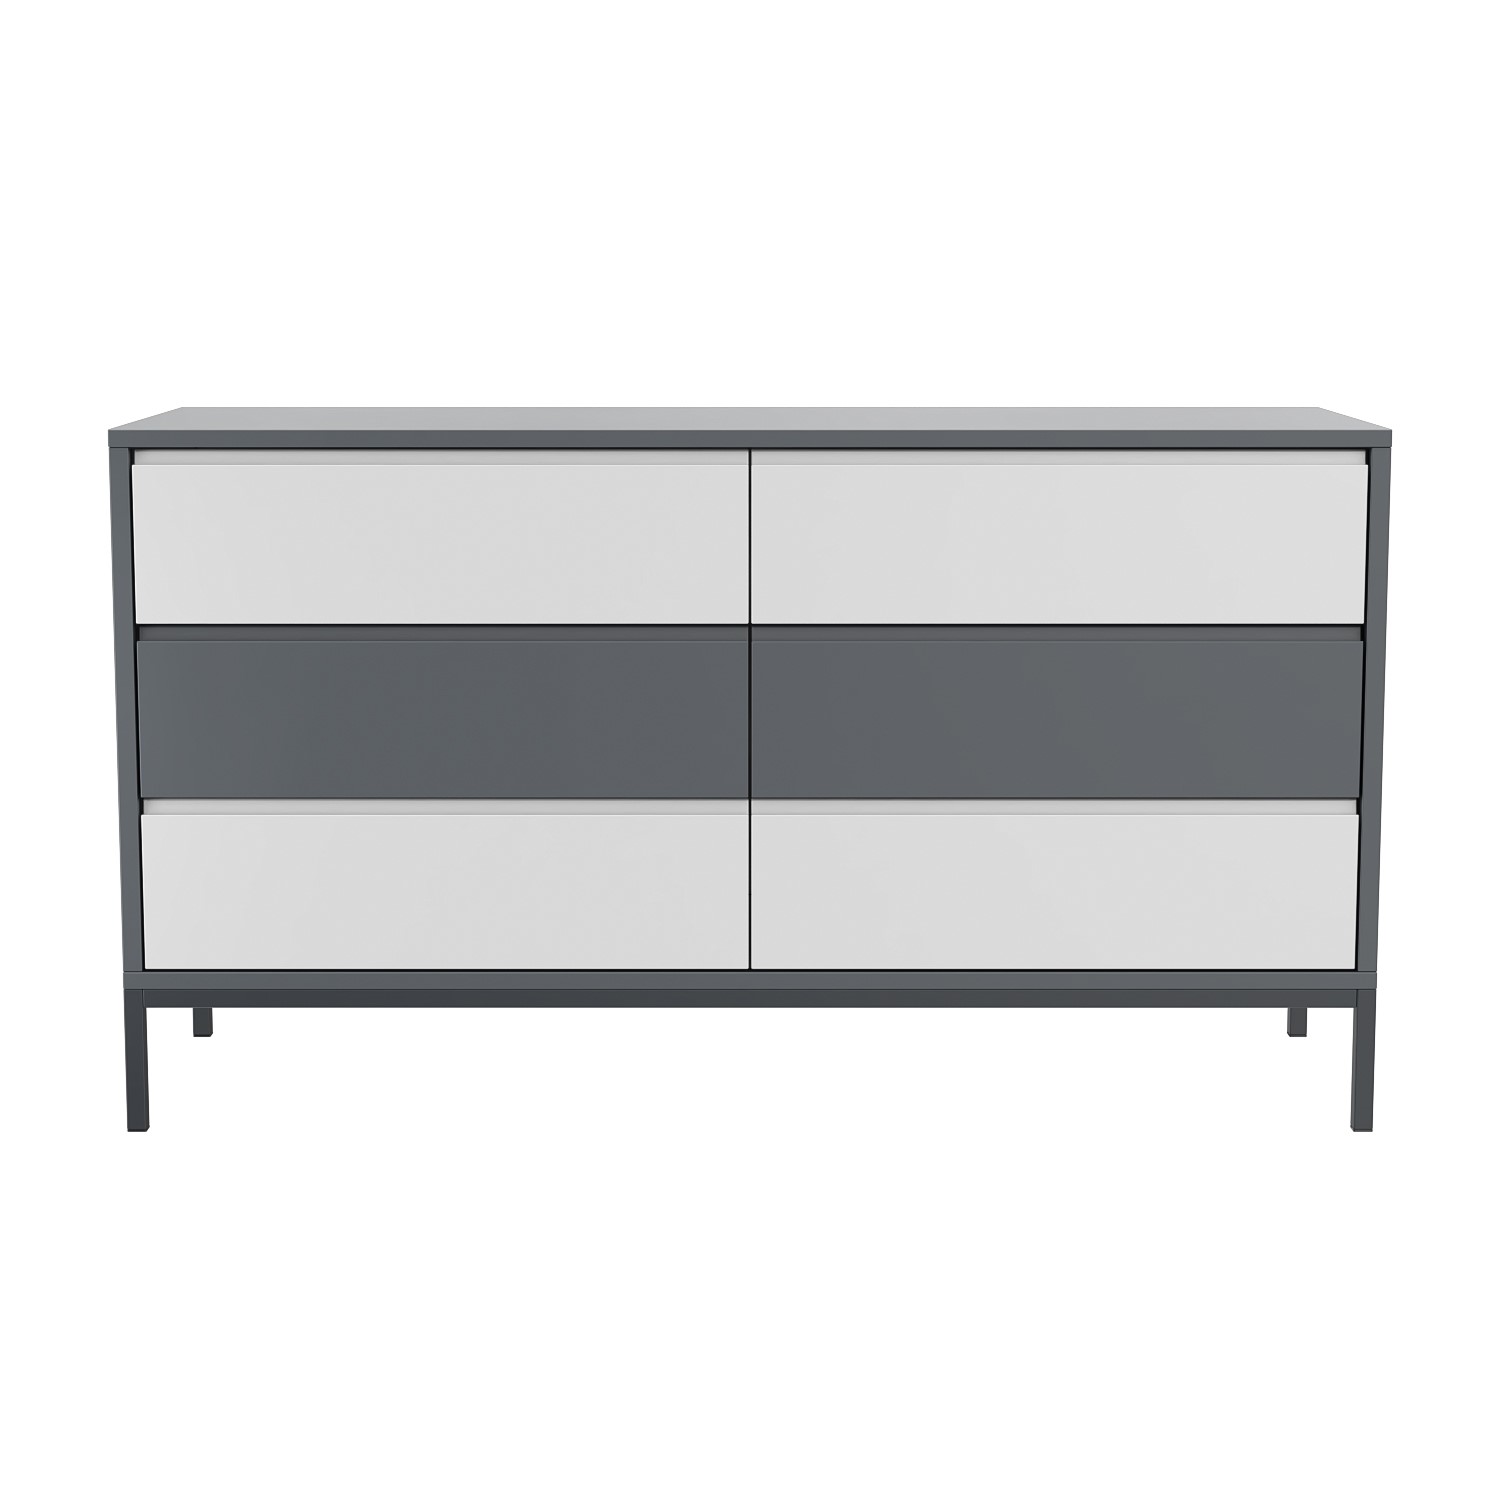 Photo of Wide grey retro chest of 6 drawers with legs - aiko